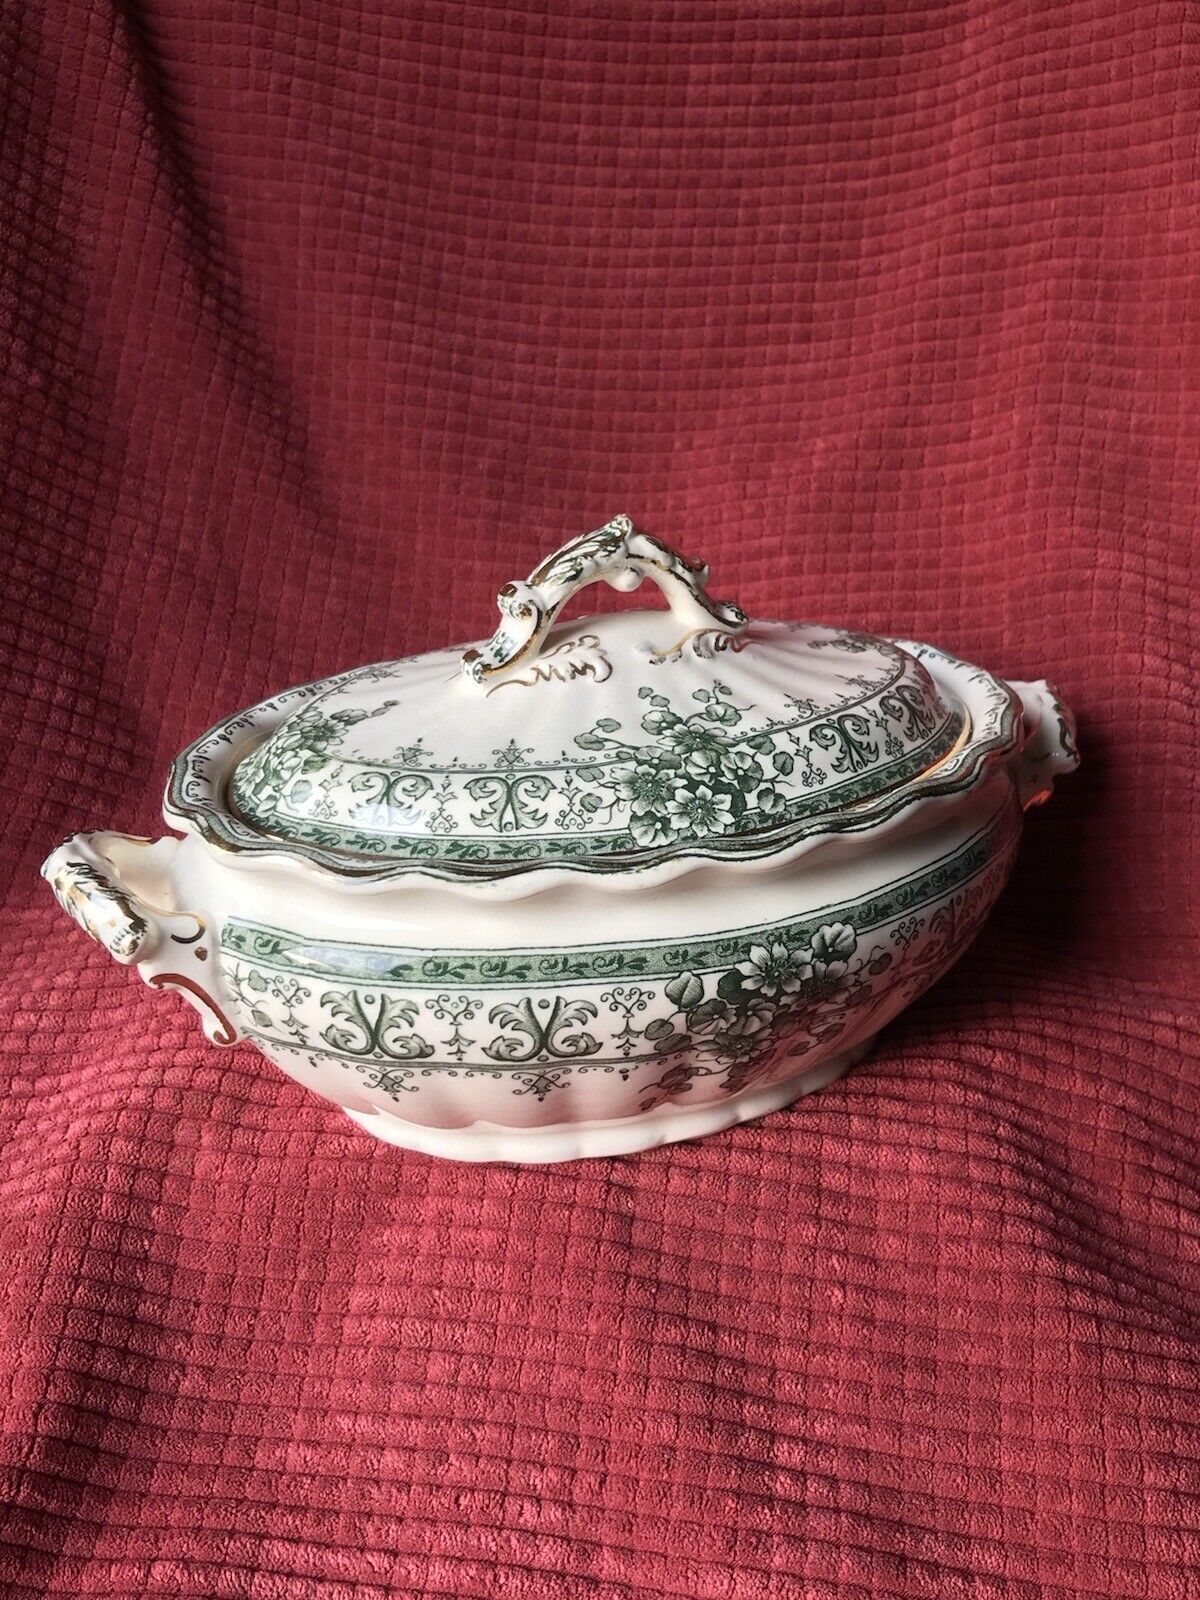 Antique c1890 Keeling & Co Green Tureen Covered Dish Oxford England Pottery